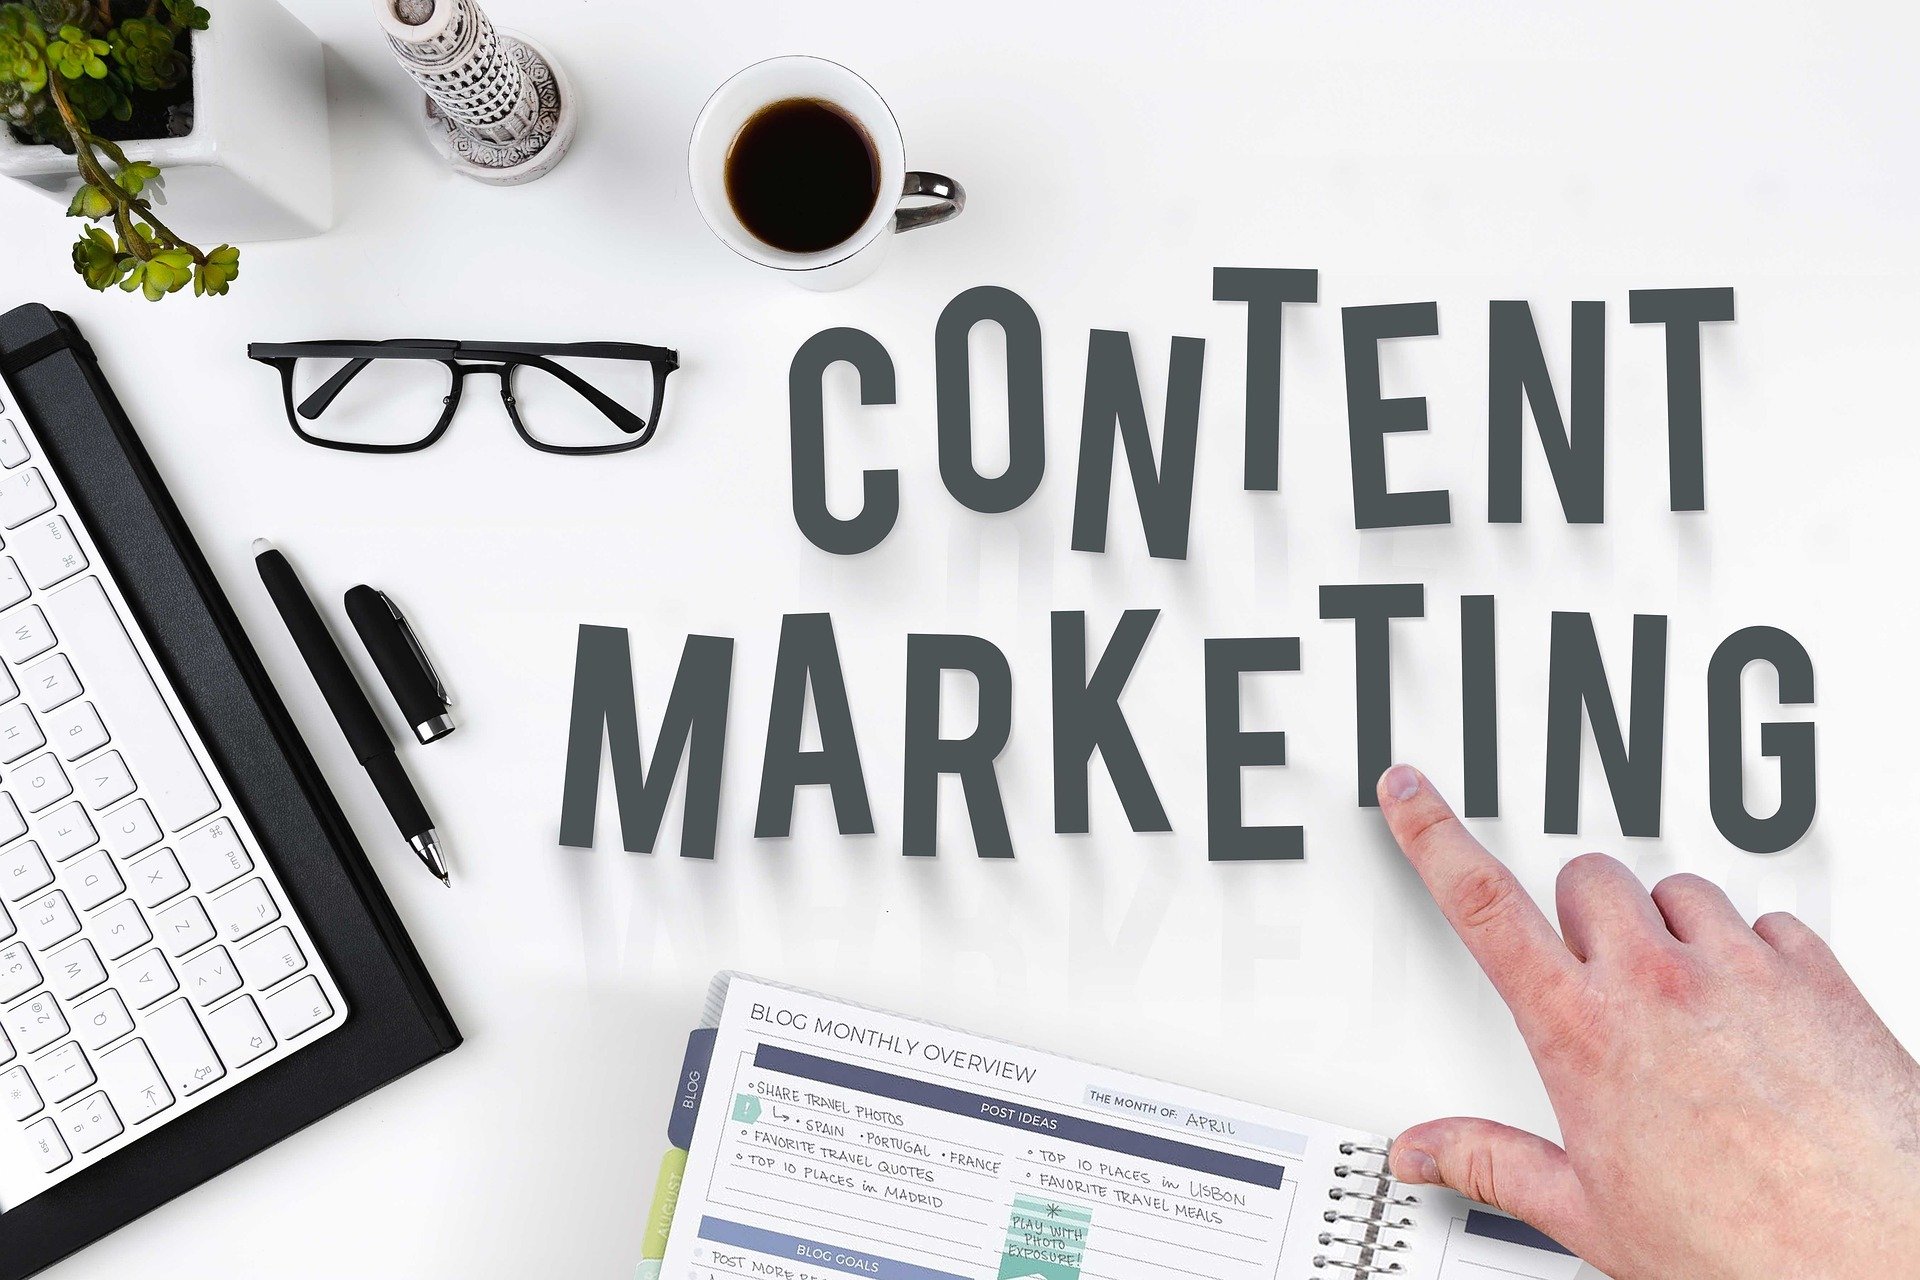 CONTENT HAS BECOME A CRITICAL TOOL FOR B2B BUYERS - WISE MARKETER